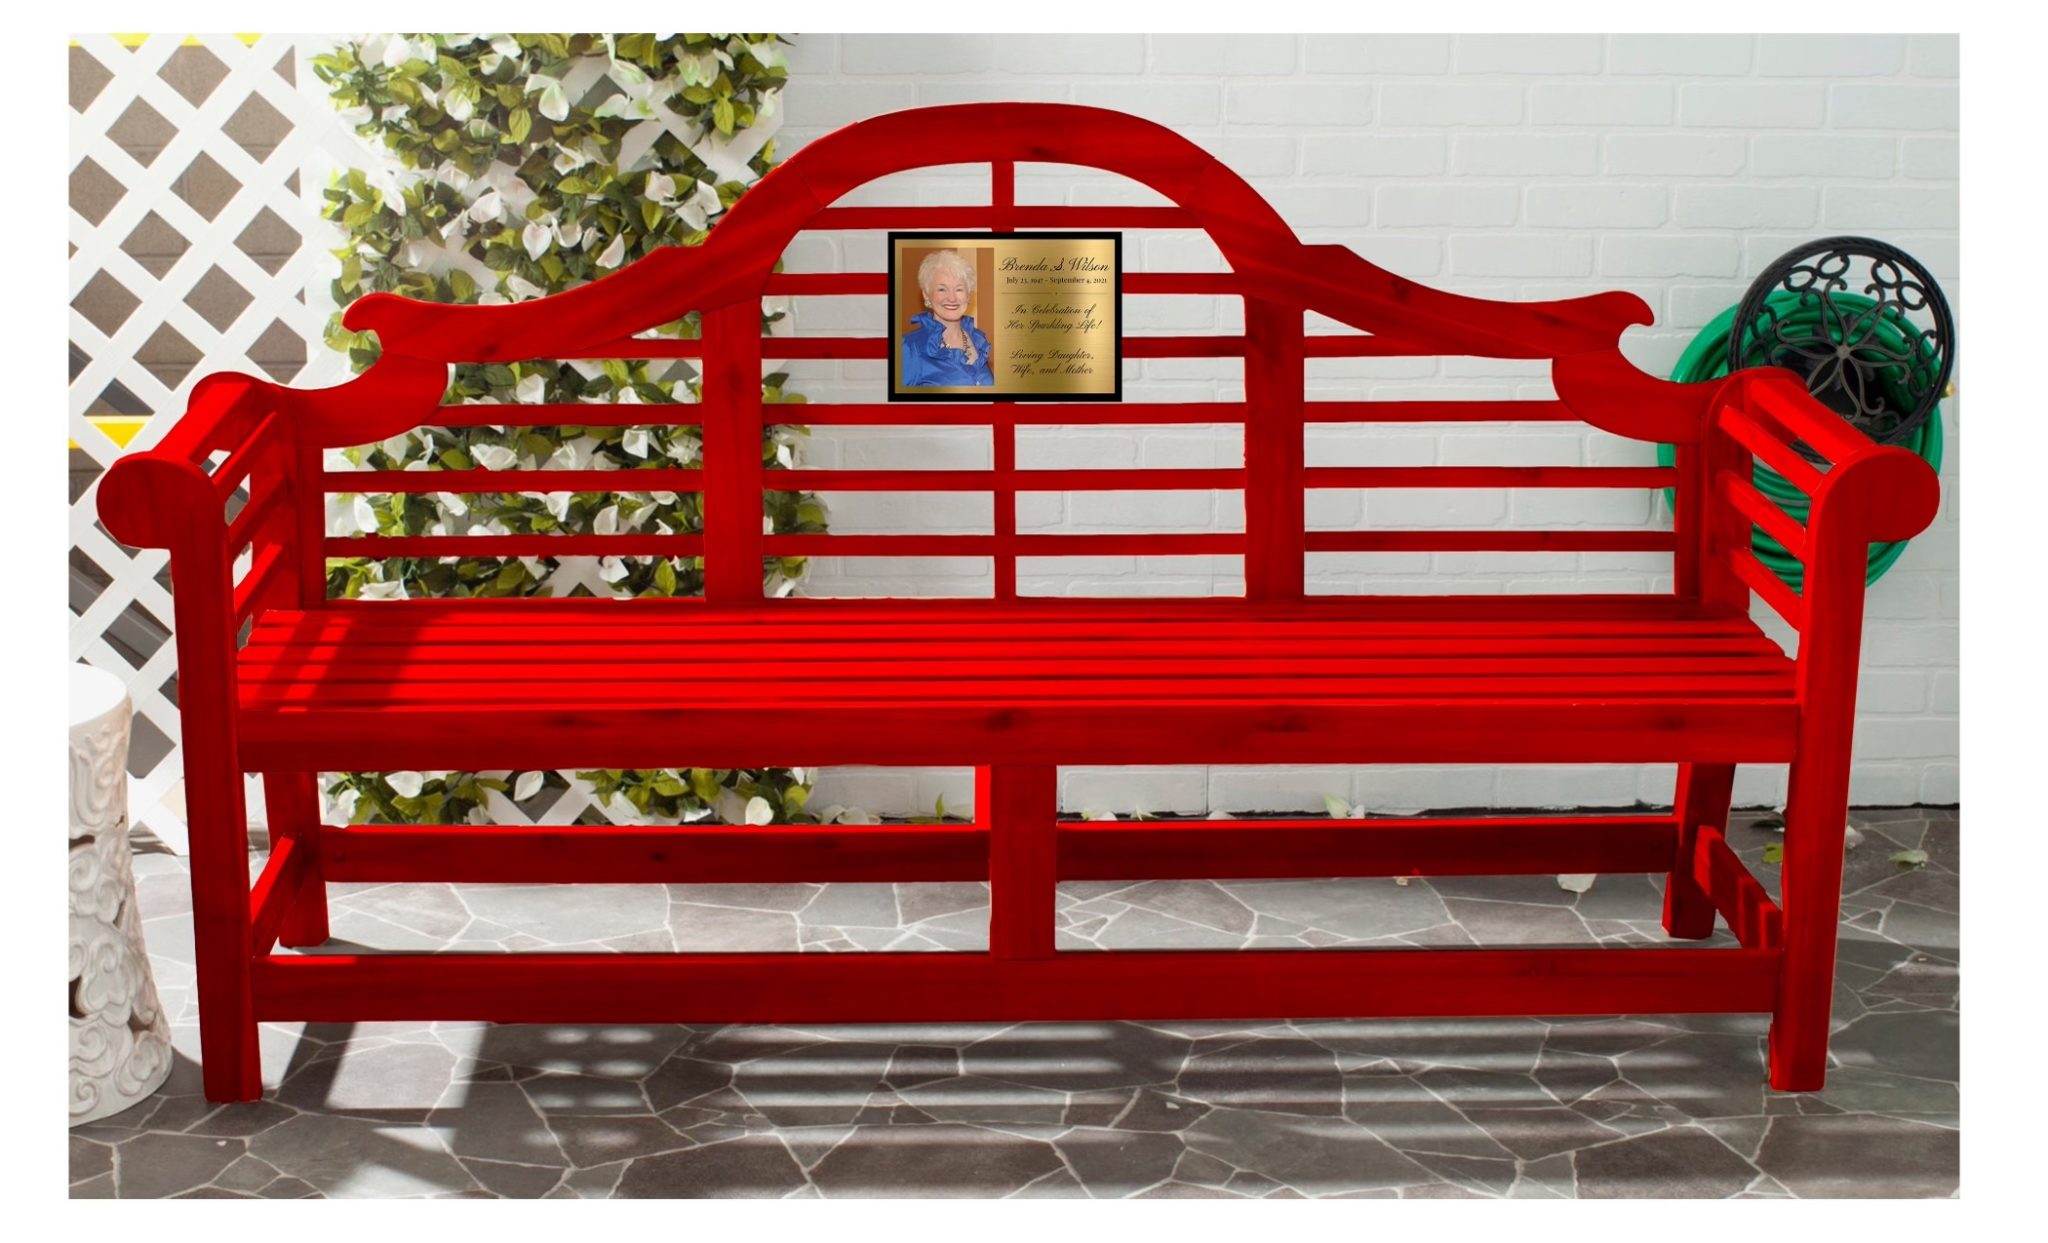 a red bench with a memorial photo and inscription to a woman, Brenda Wilson